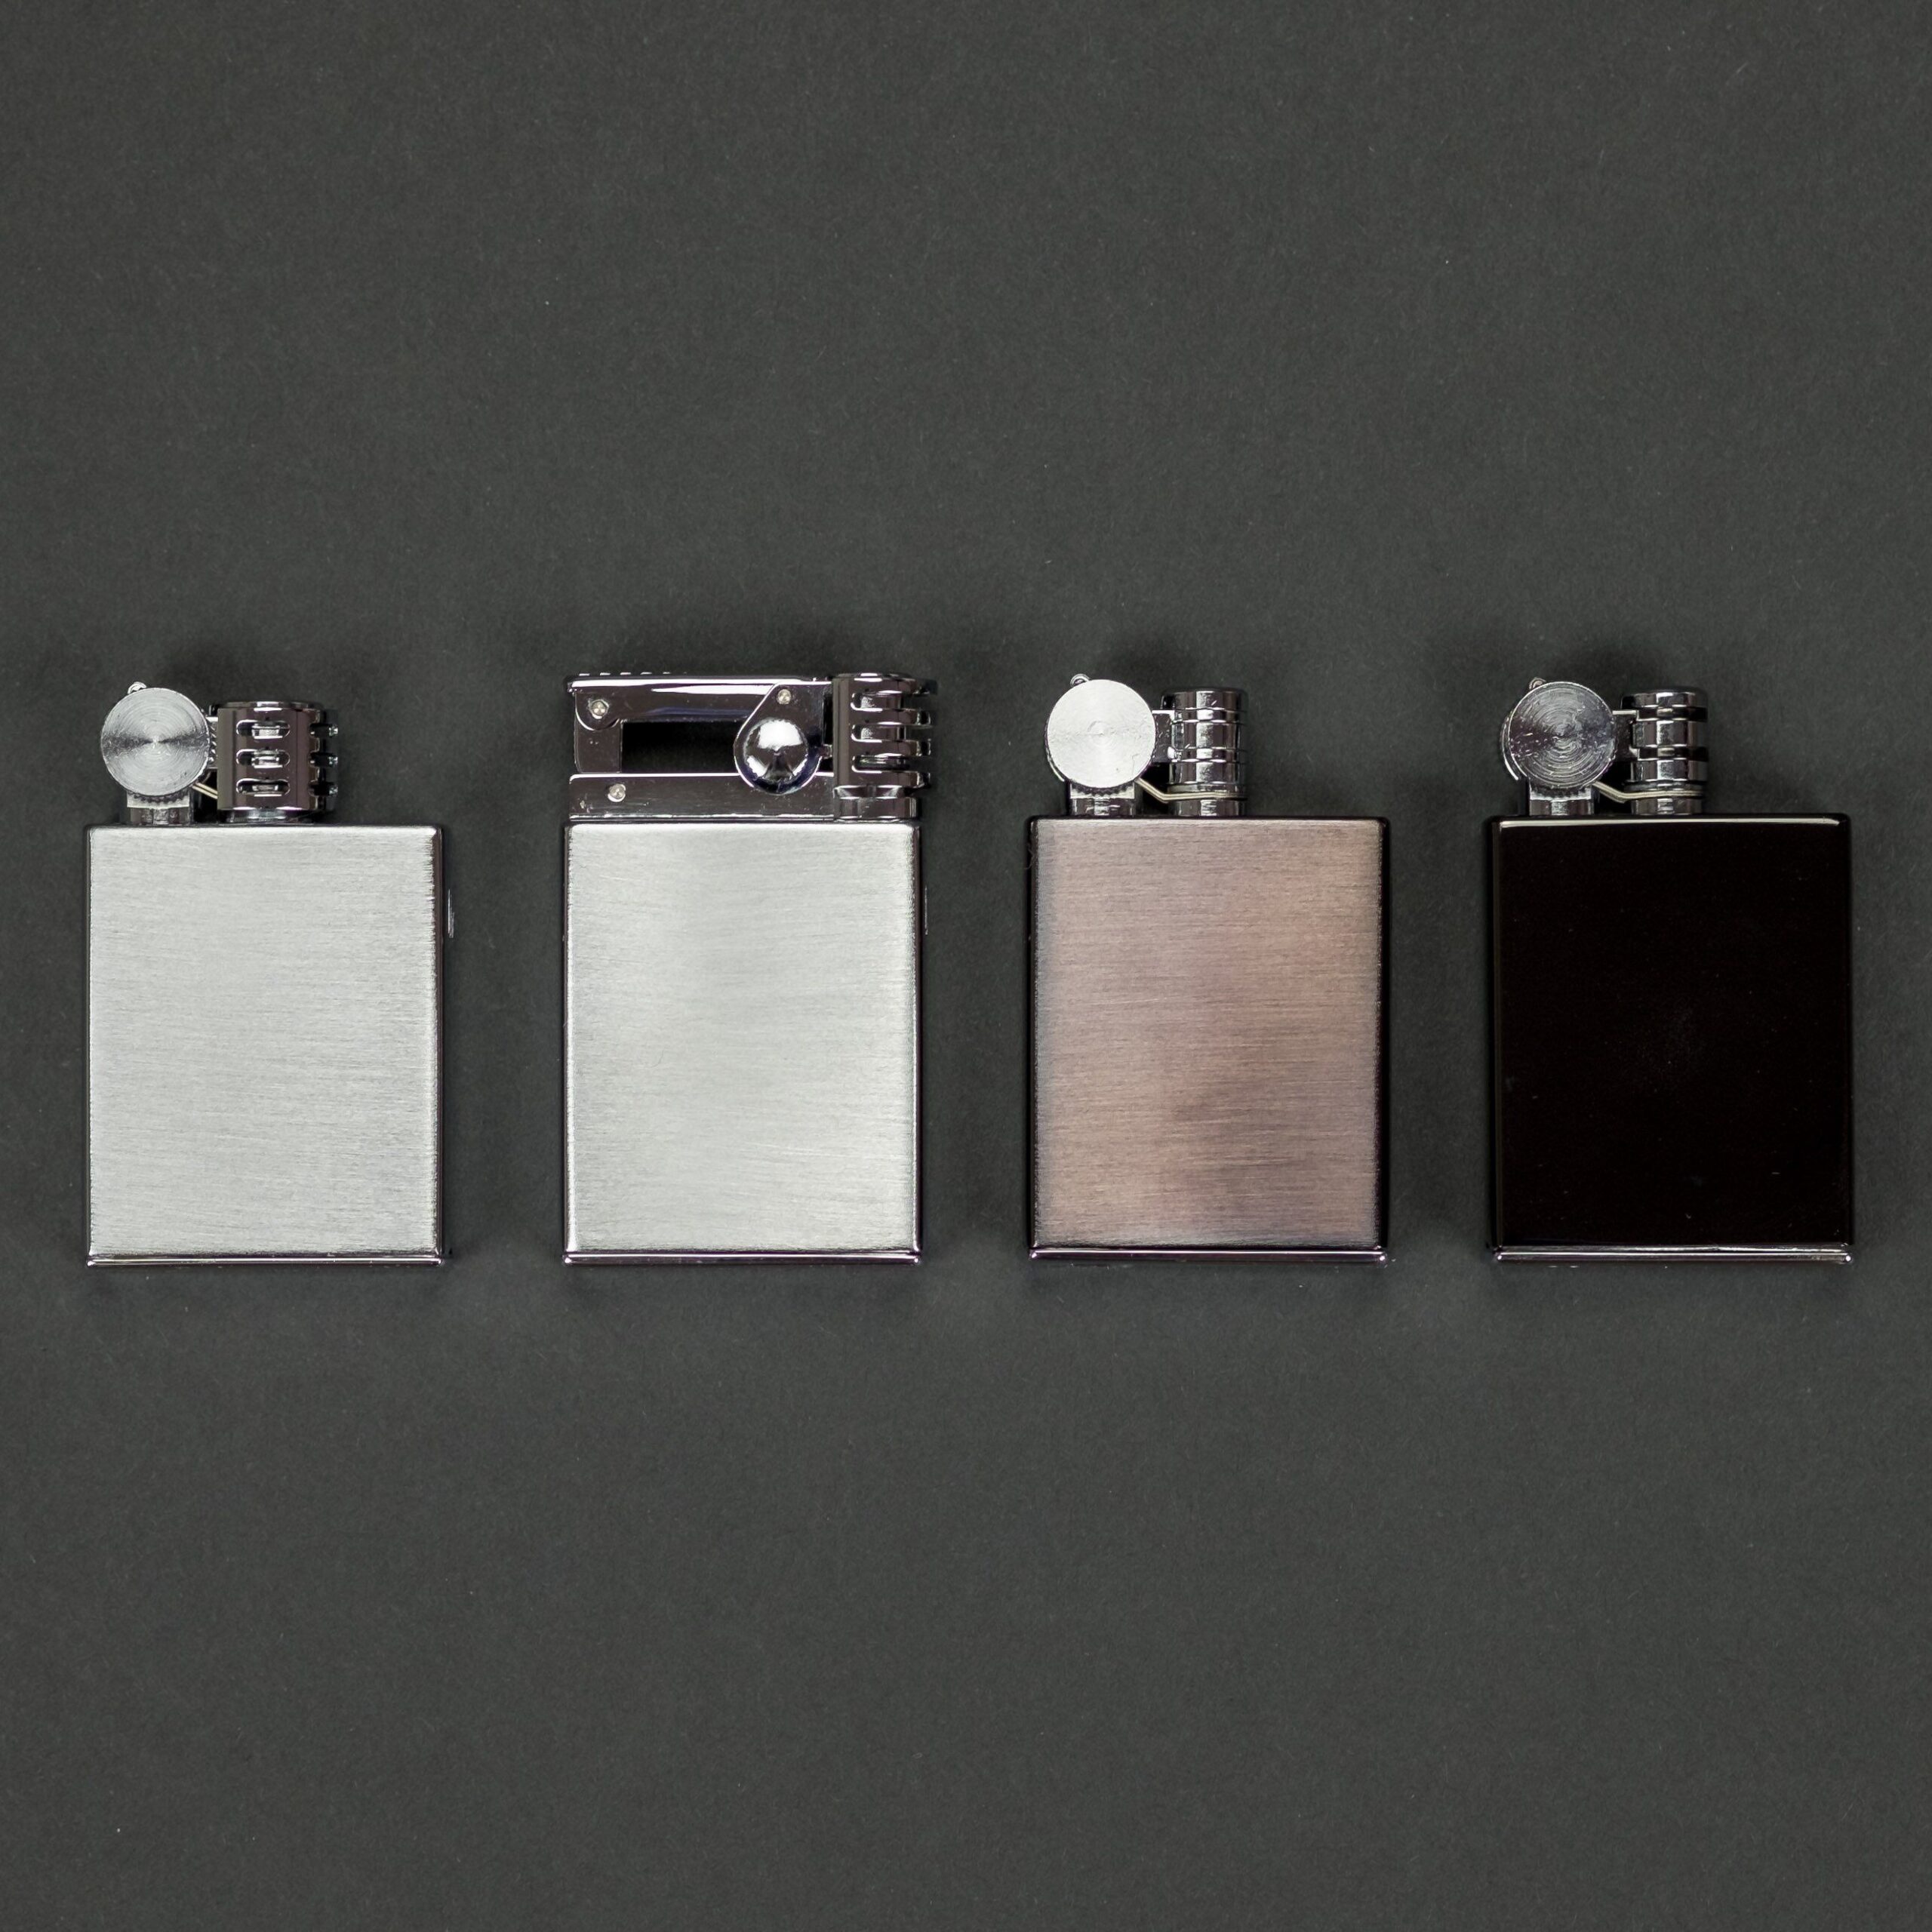 Only 24.60 usd for Tokyo Pipe Co. Marvelous Lighter Online at the Shop